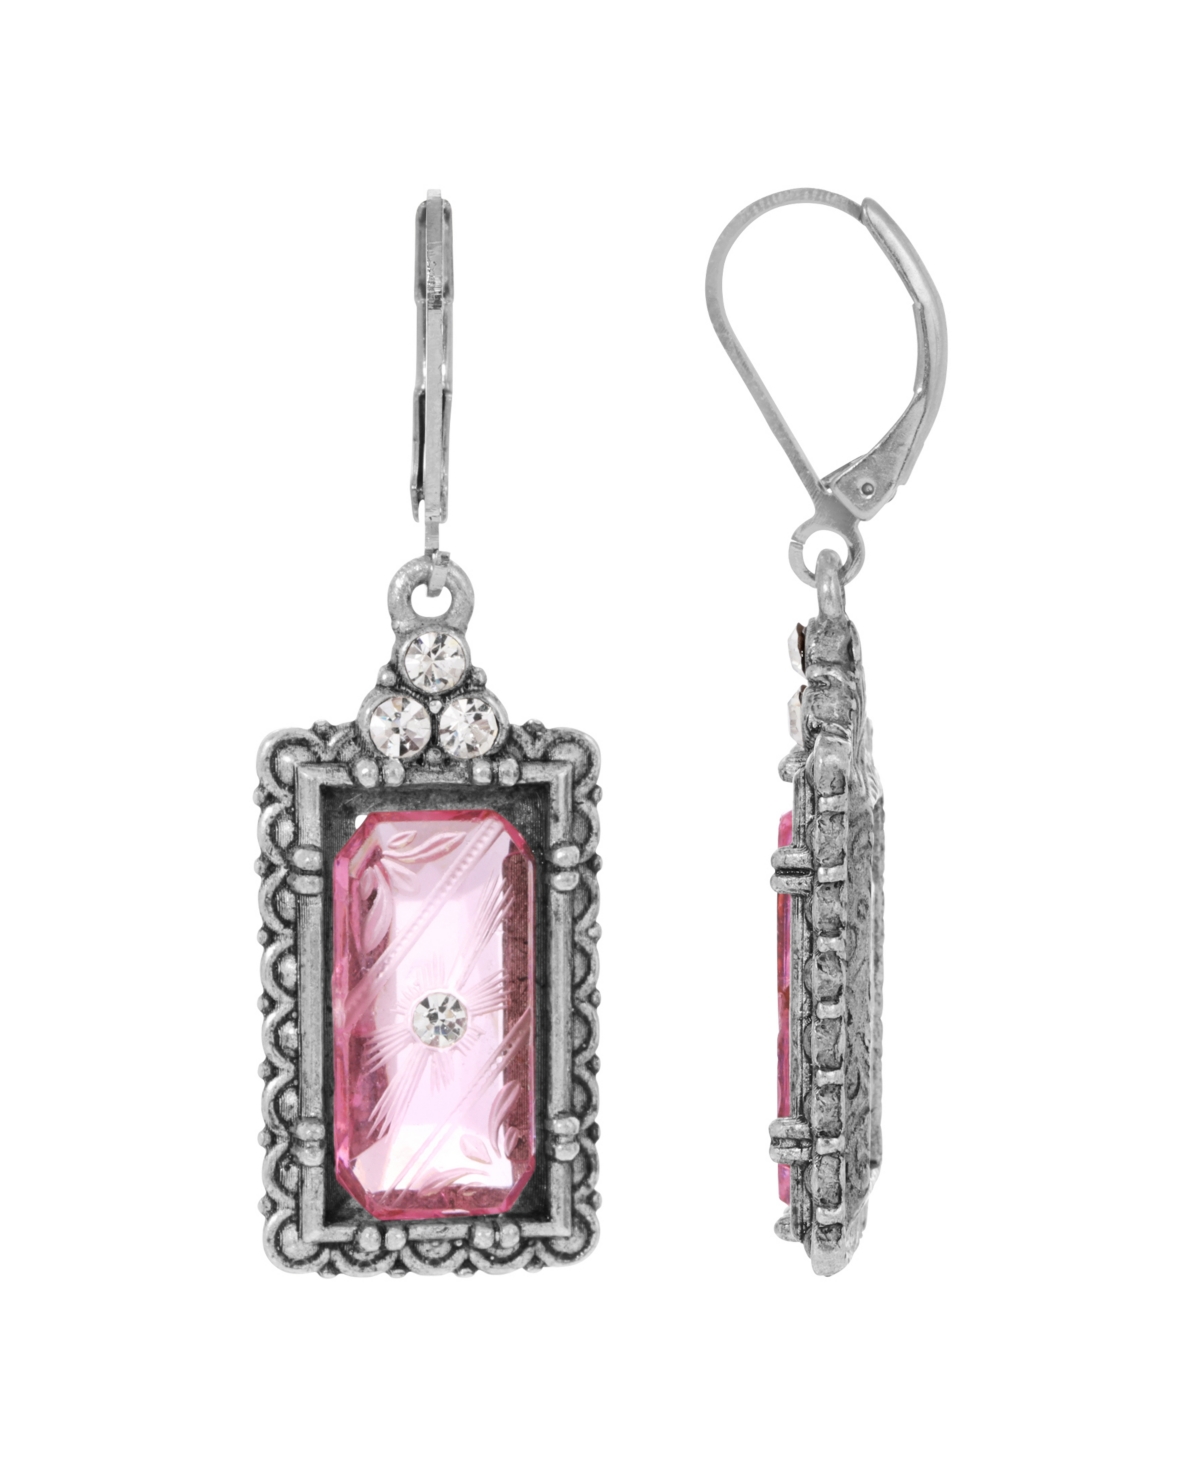 2028 Women's Pewter Silver-tone And Crystal Stone Earrings In Pink